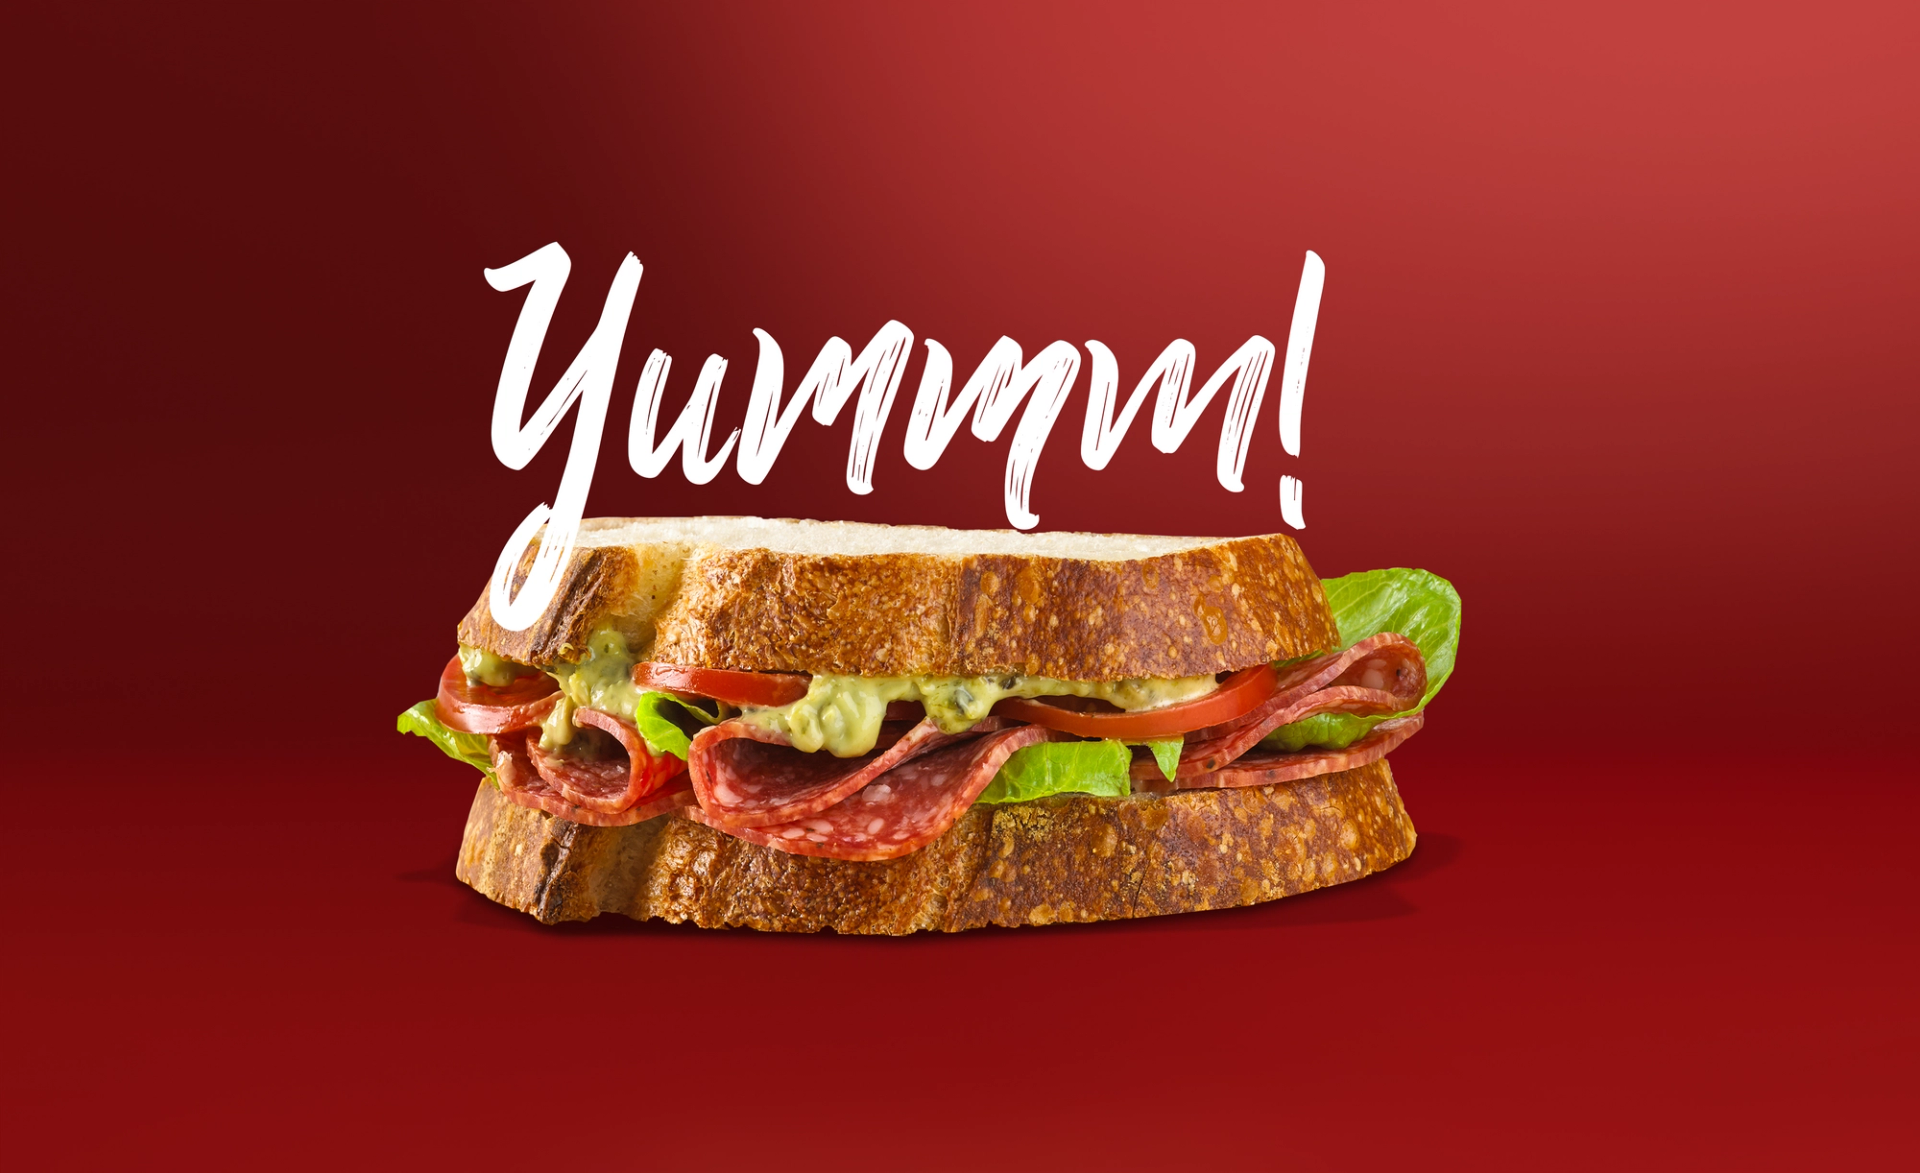 Primo meat brand design by Our Revolution with a salami sandwich with text “Yummm!”